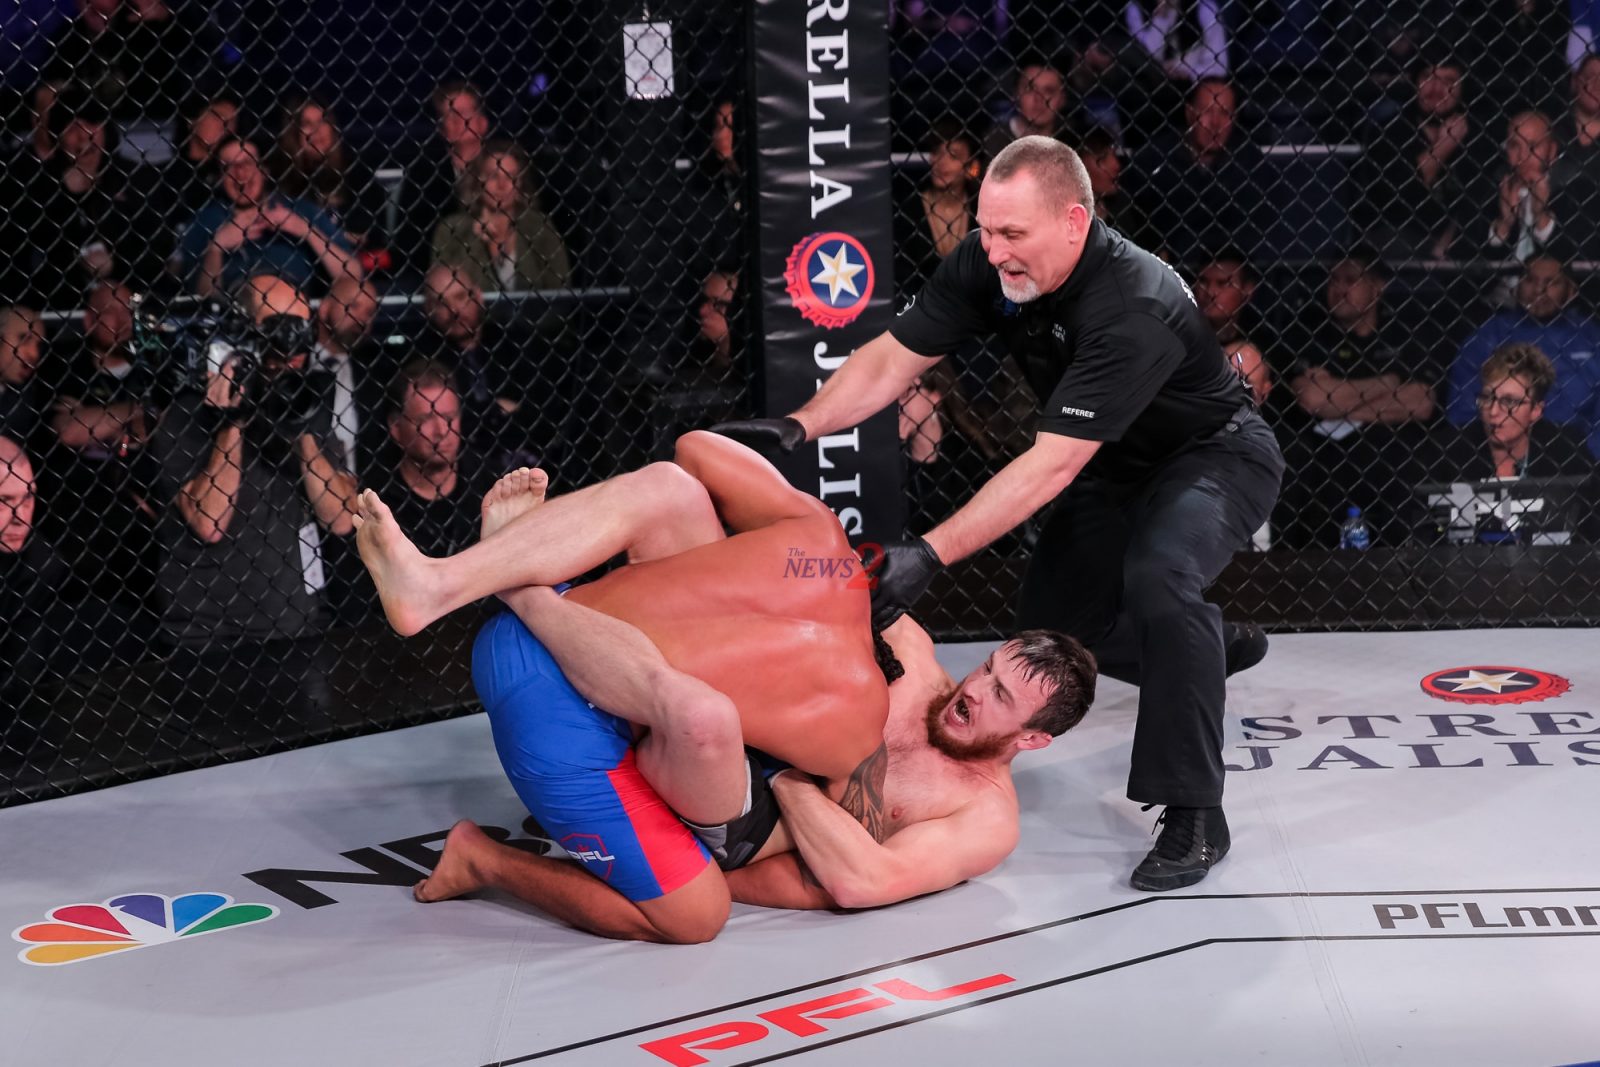 The Last Professional Fighters League of 2018 in New York